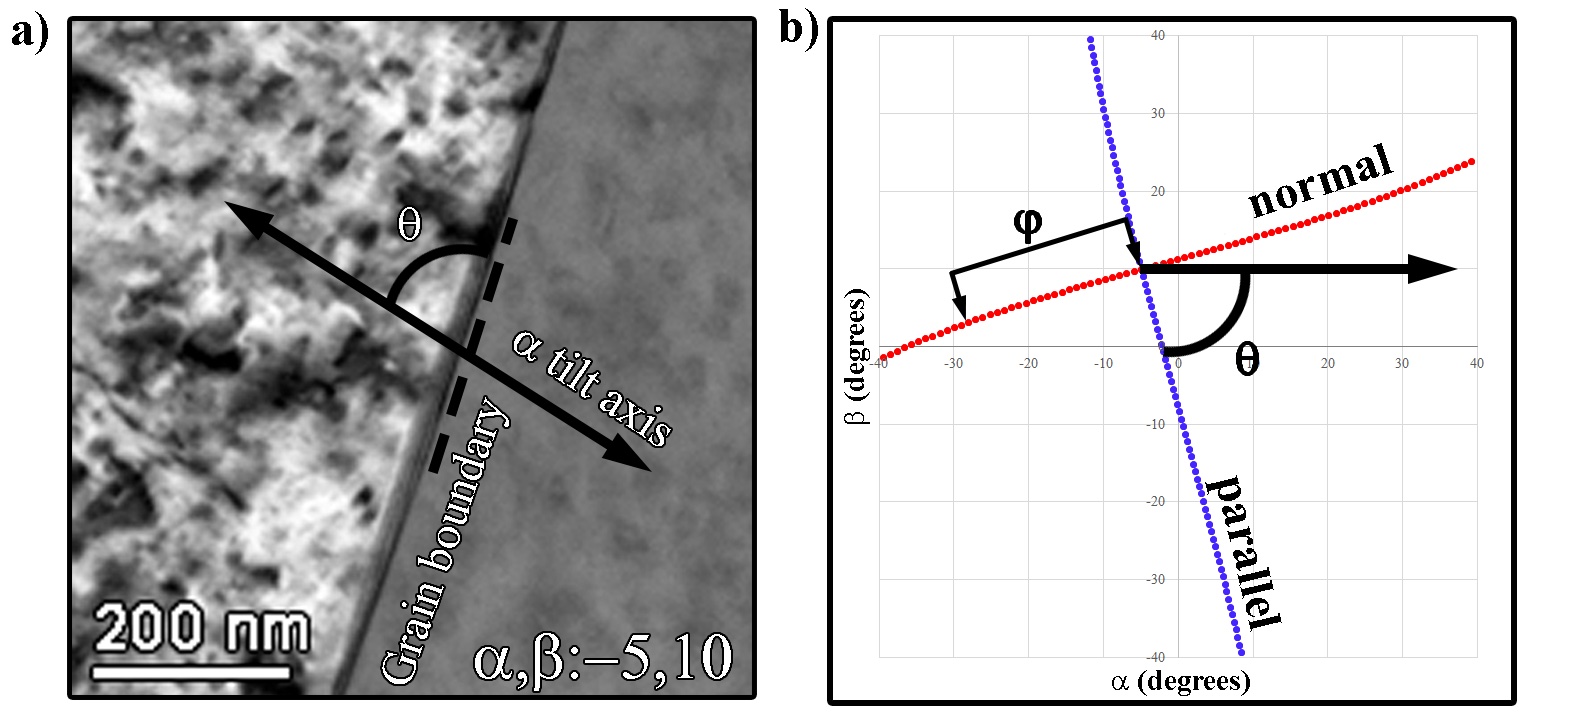 Plotting tip/tilt coordinates for interface analysis. A
TEM (BF) image of a grain boundary is shown in with the angle to the α
tilt axis (θ) highlighted (a). The trace of the boundary on a tip/tilt
diagram (b) illustrates the angular movement (φ) normal to the boundary
conditions shown in (a).